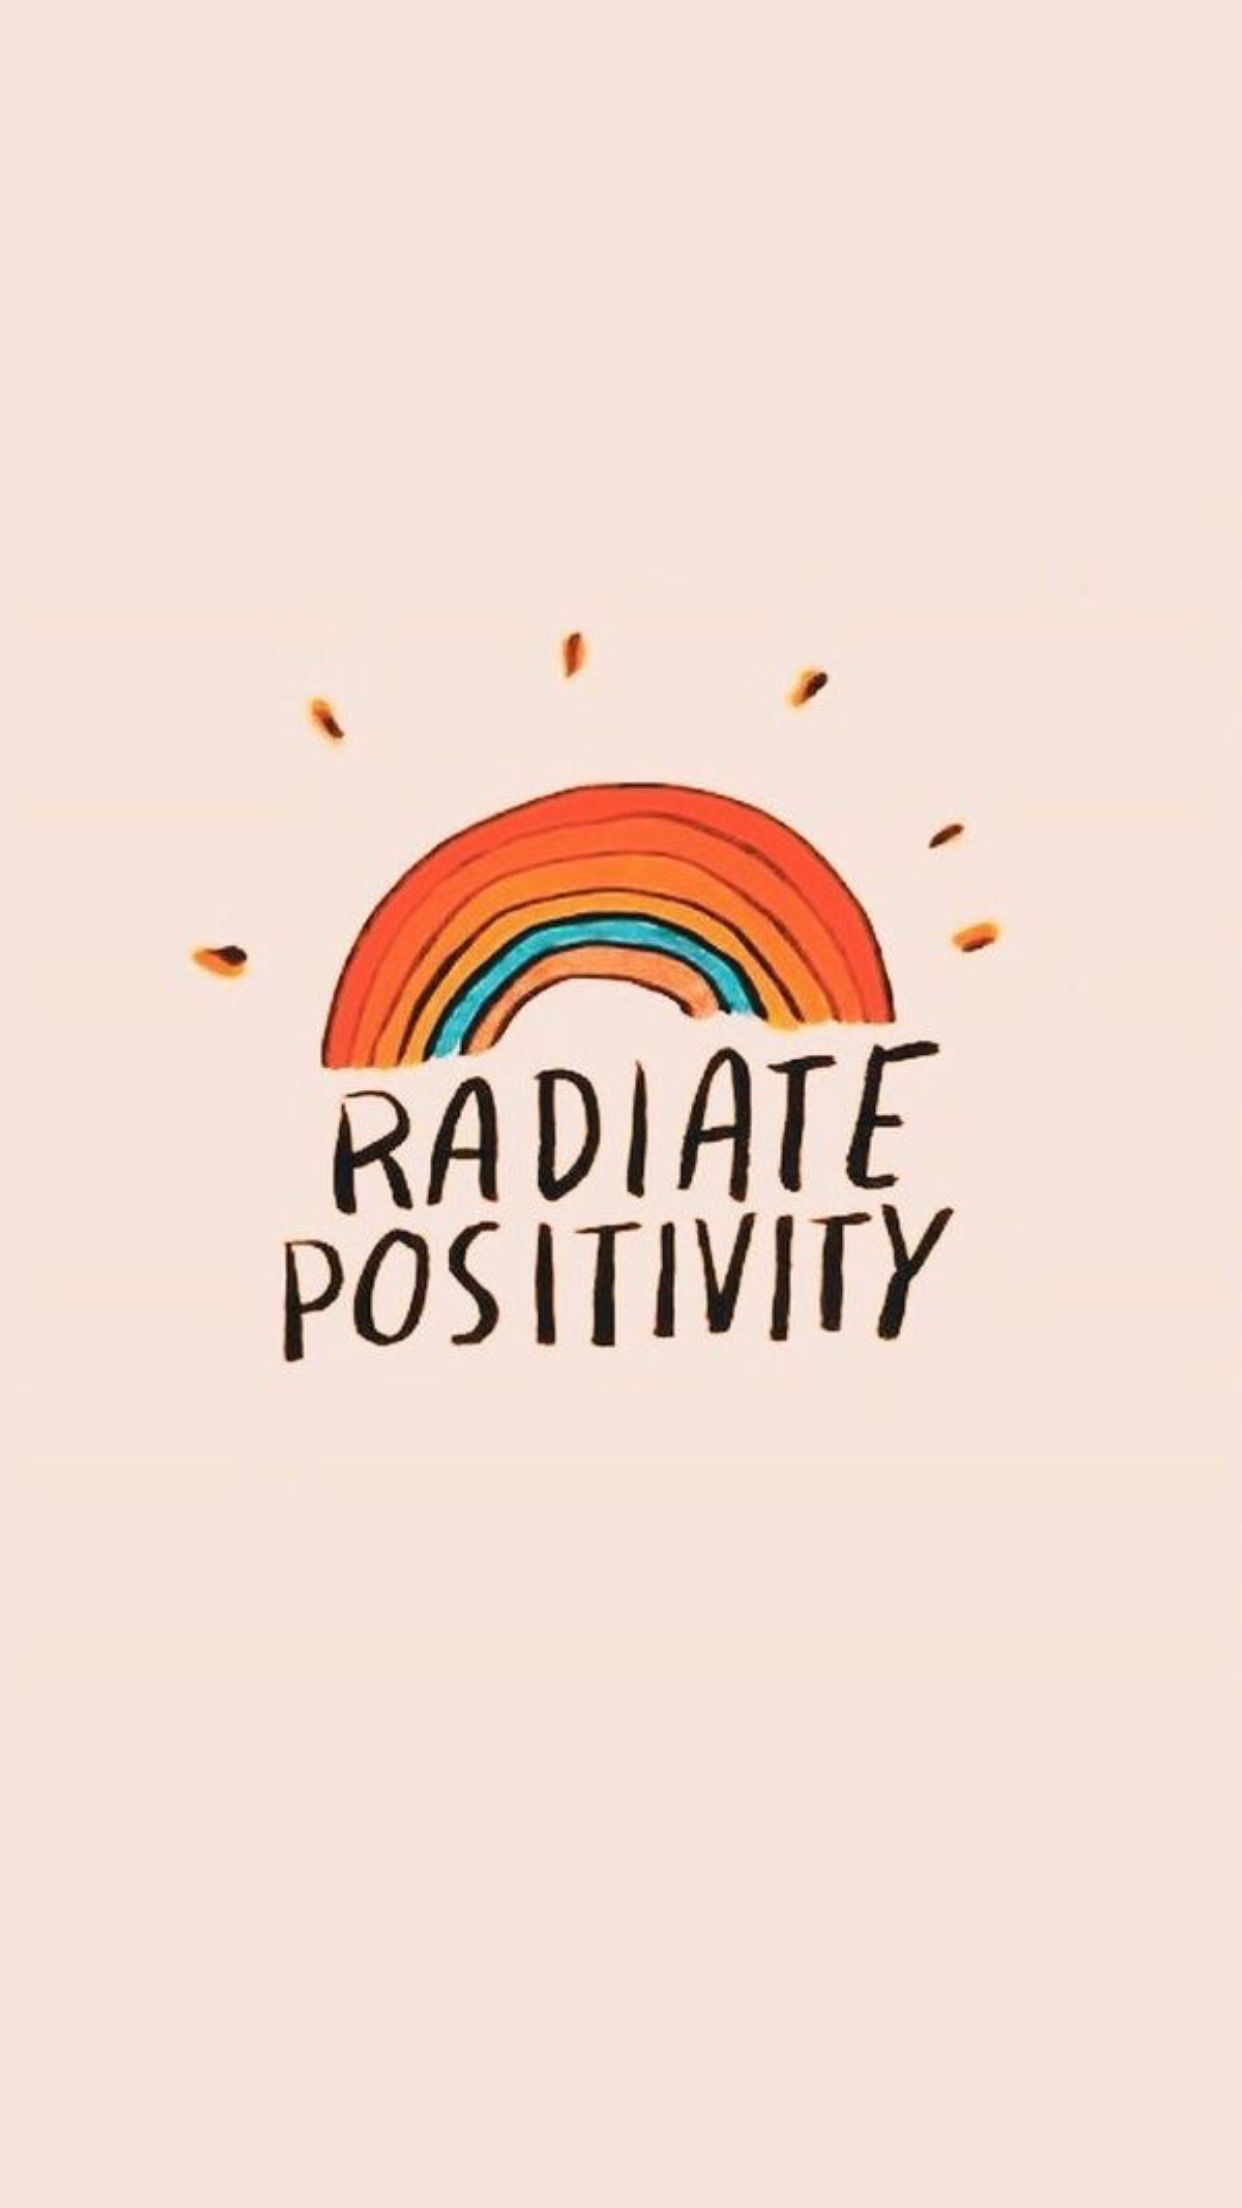 quotes: radiate positivity. Wallpaper quotes, Positive quotes, Inspirational quotes